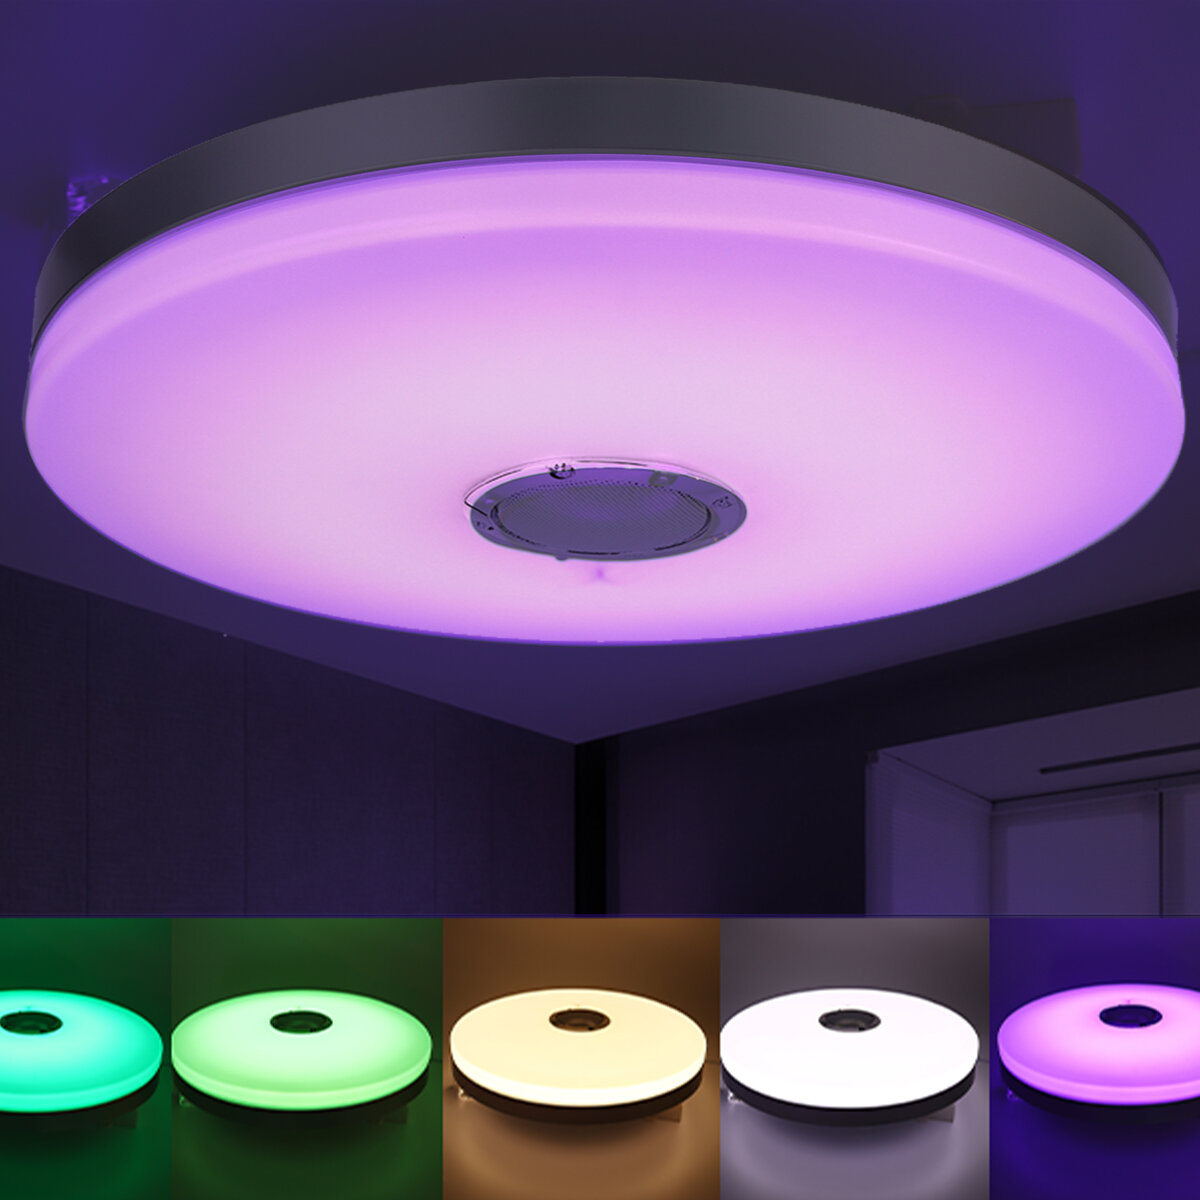 

85-260V LED Ceiling Light RGB bluetooth Music Speaker Dimmable Lamp APP + Remote Control